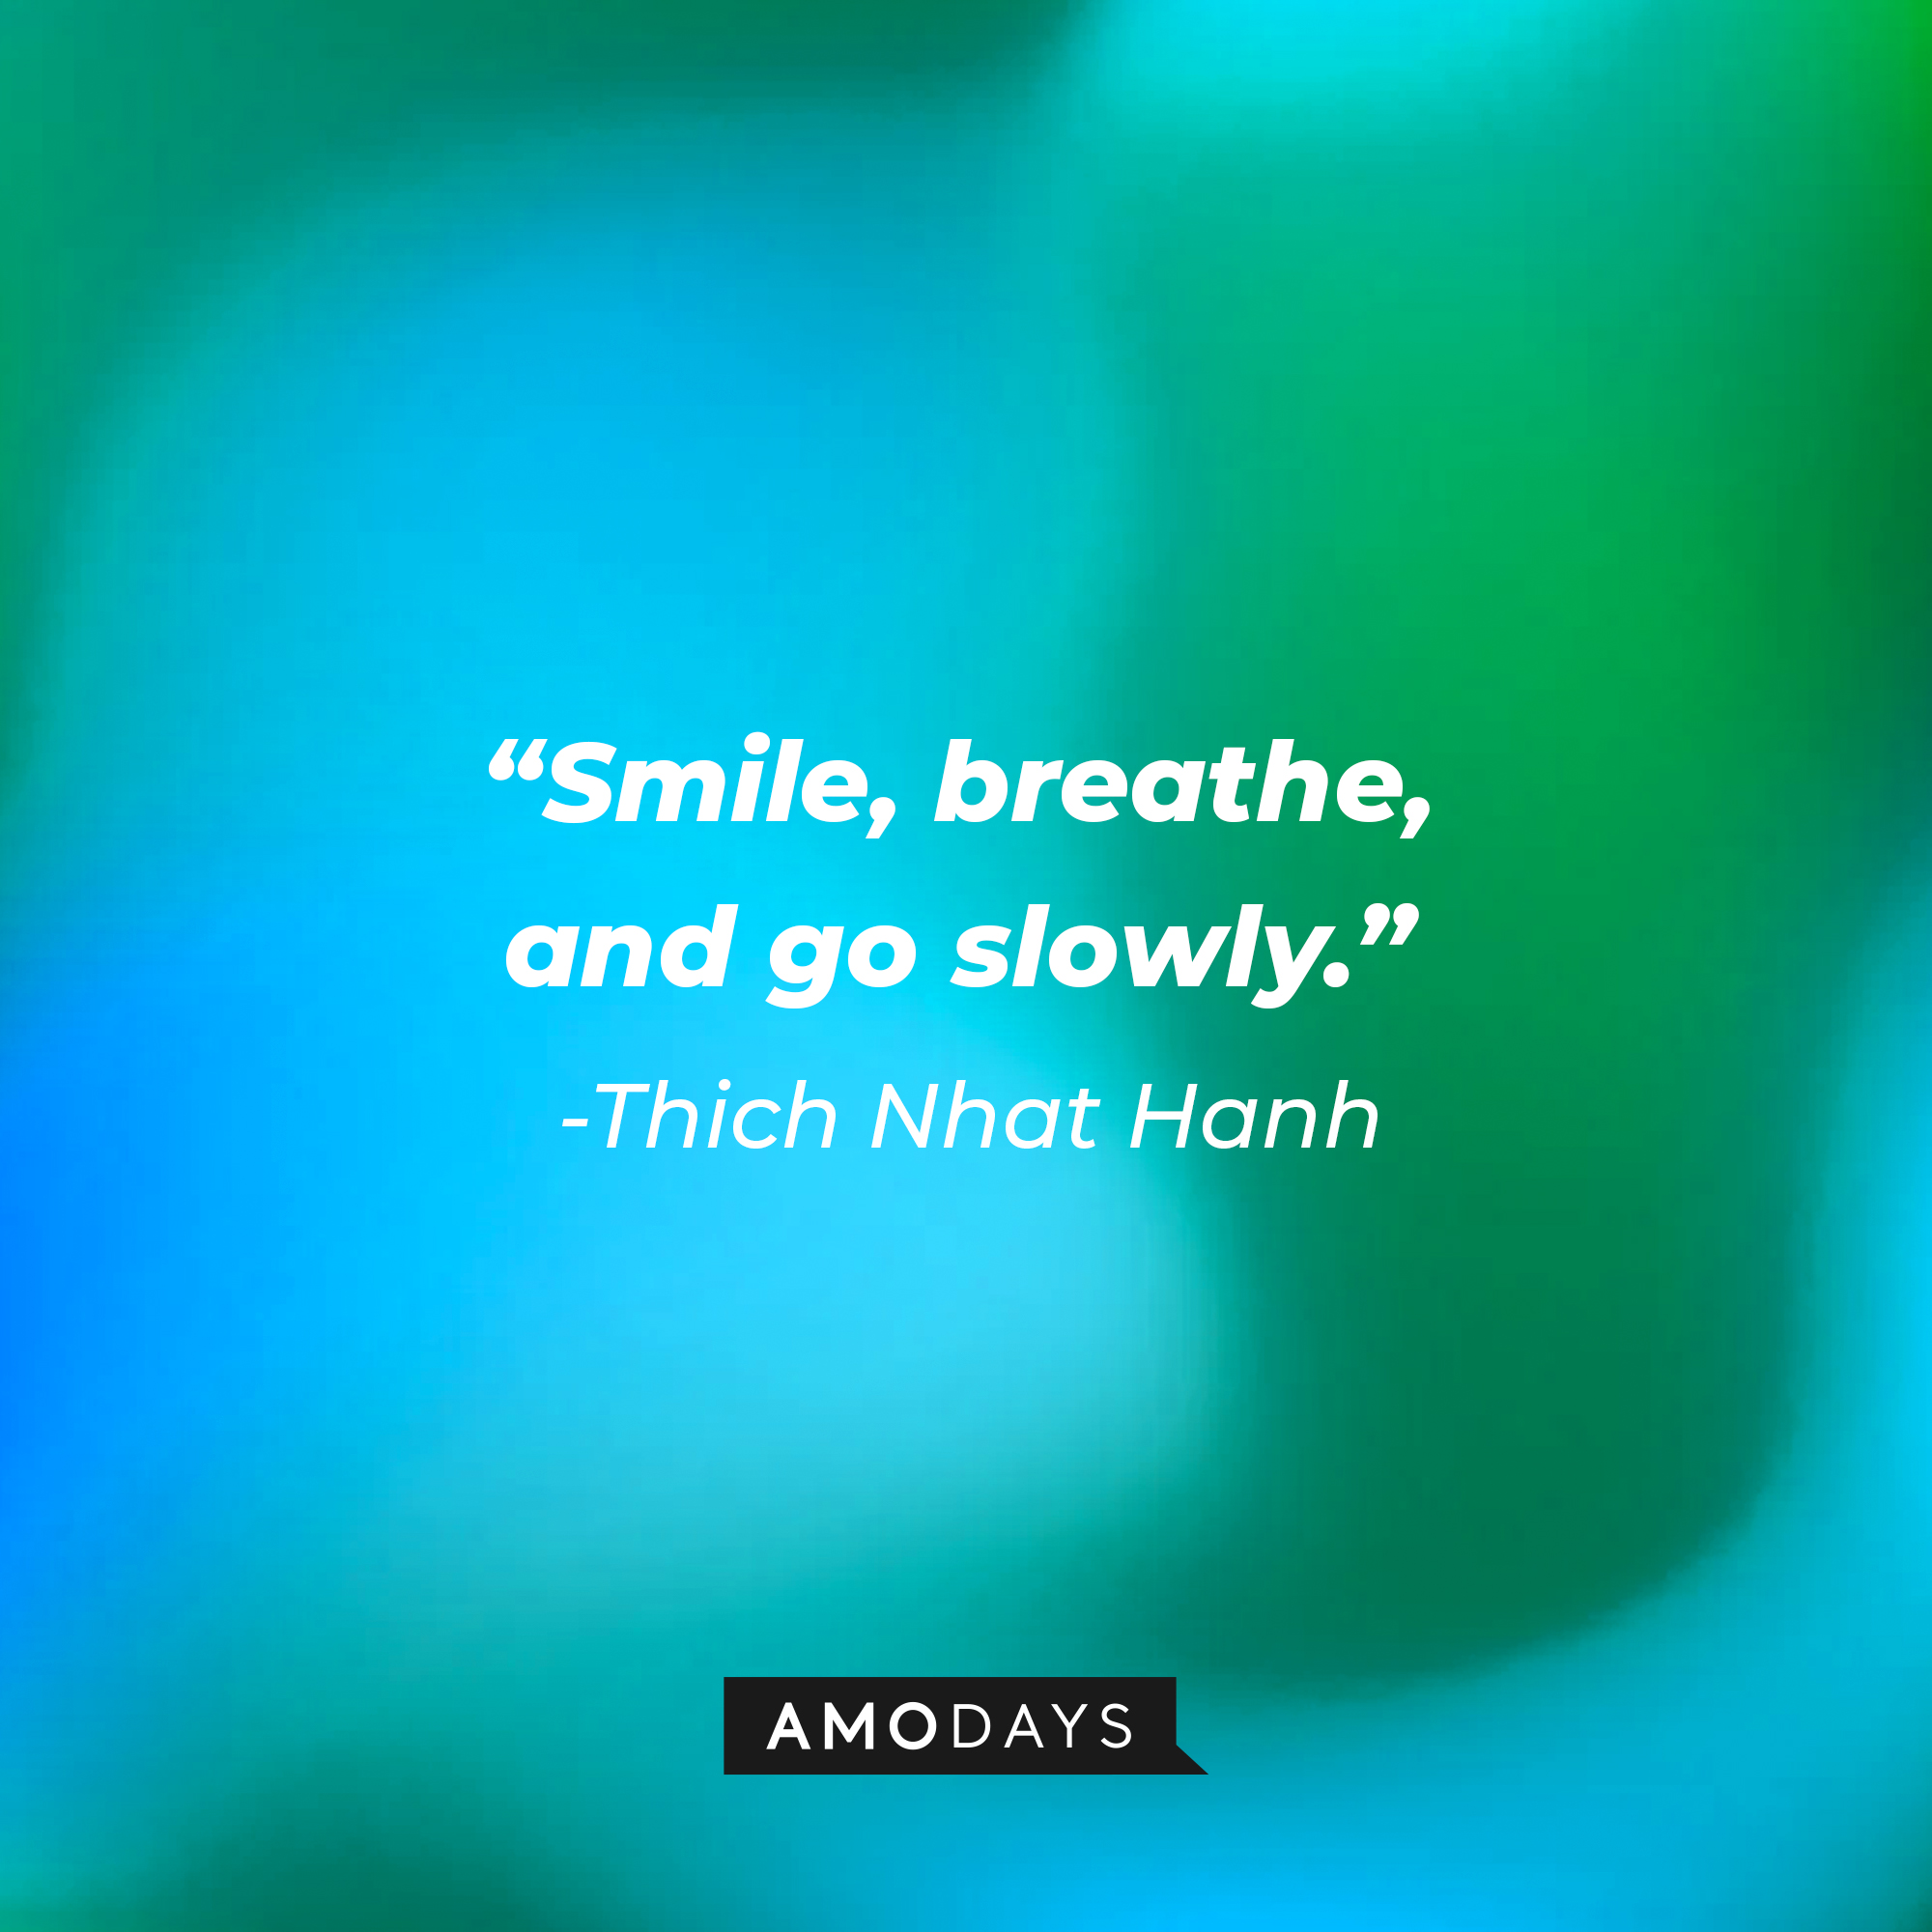 Thich Nhat Hanh's quote: “Smile, breathe, and go slowly."  | Image: Amodays